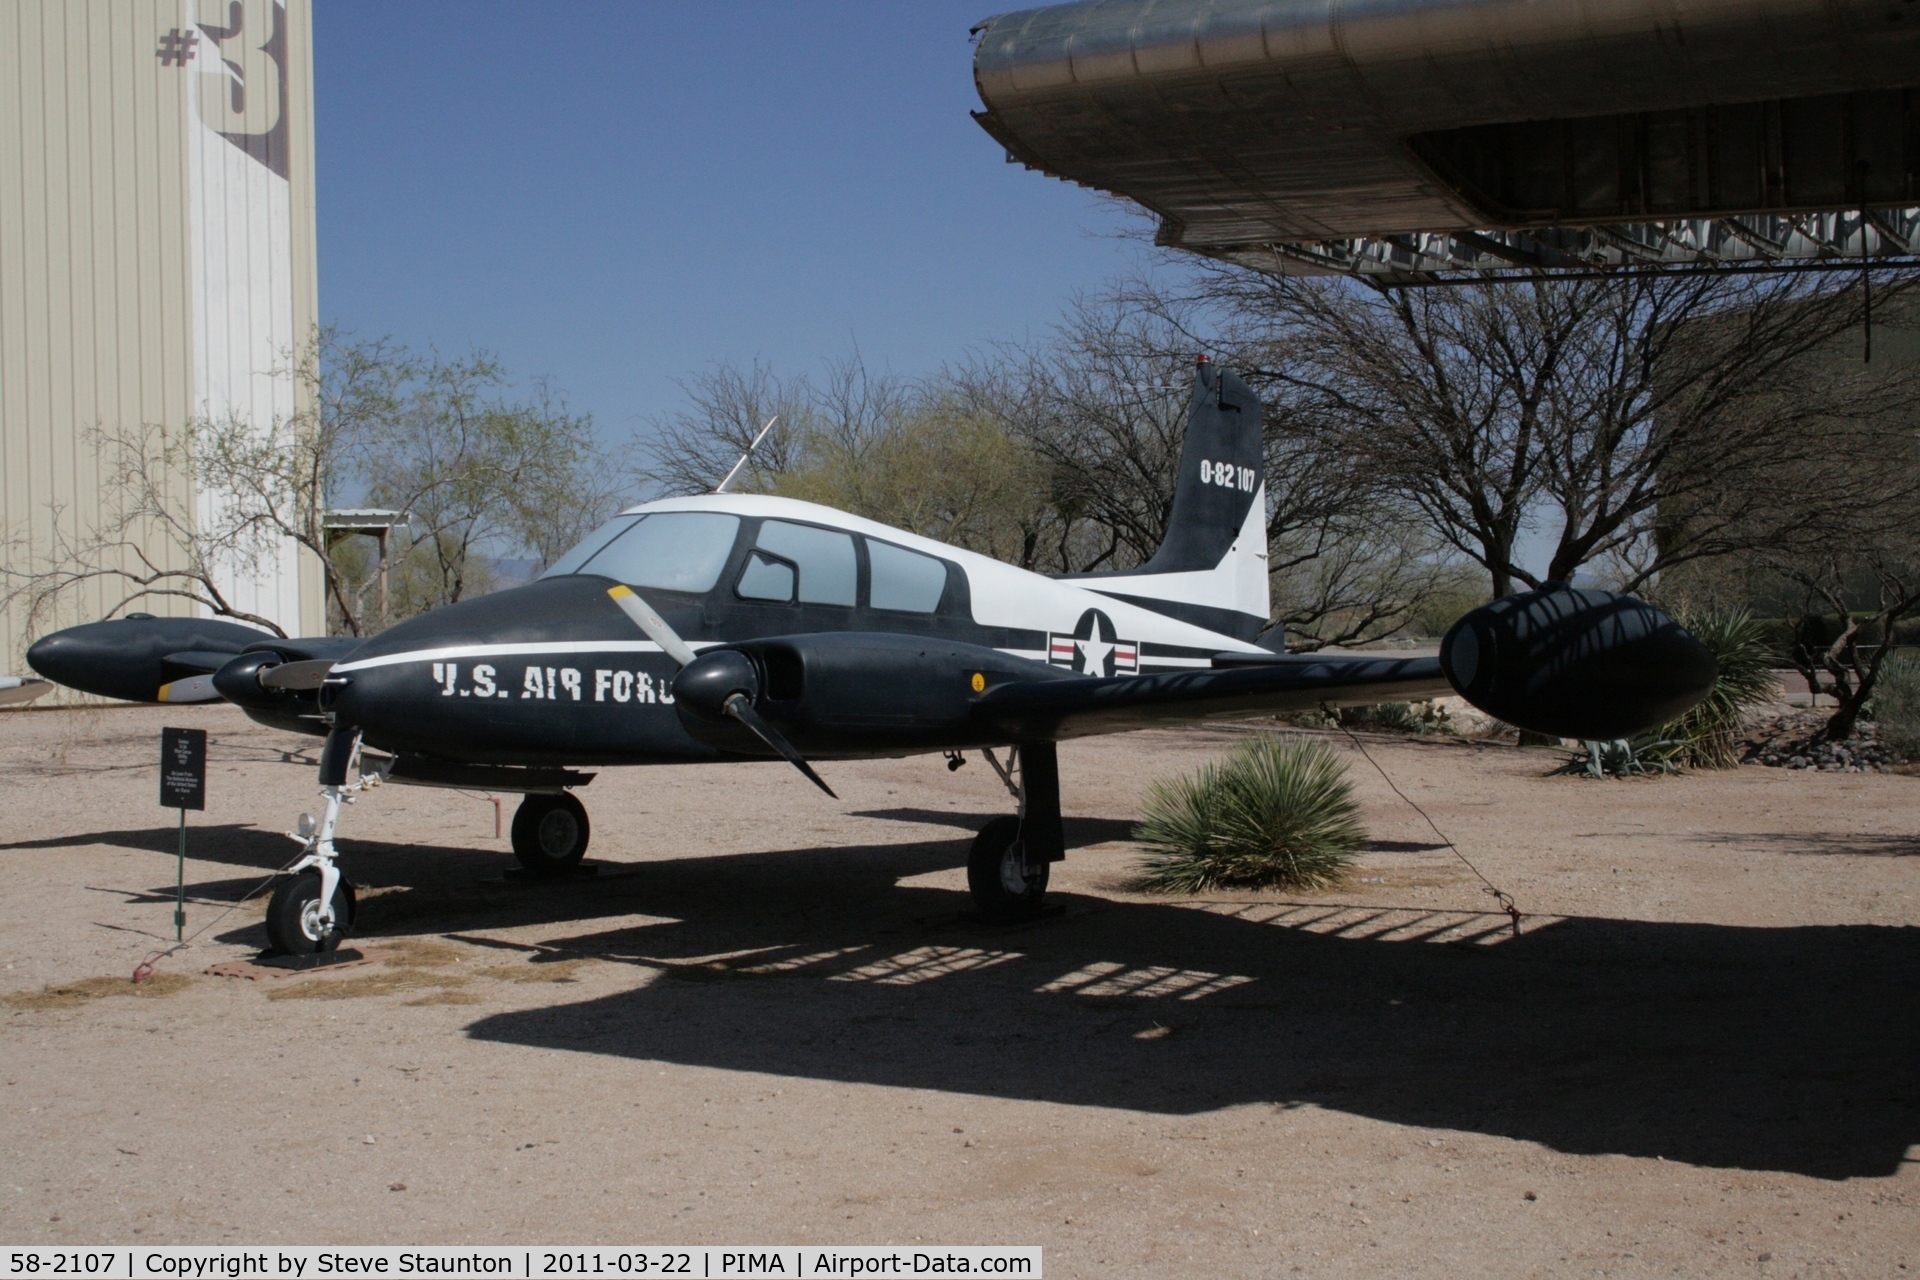 58-2107, 1958 Cessna U-3A Blue Canoe (310A) C/N 38081, Taken at Pima Air and Space Museum, in March 2011 whilst on an Aeroprint Aviation tour